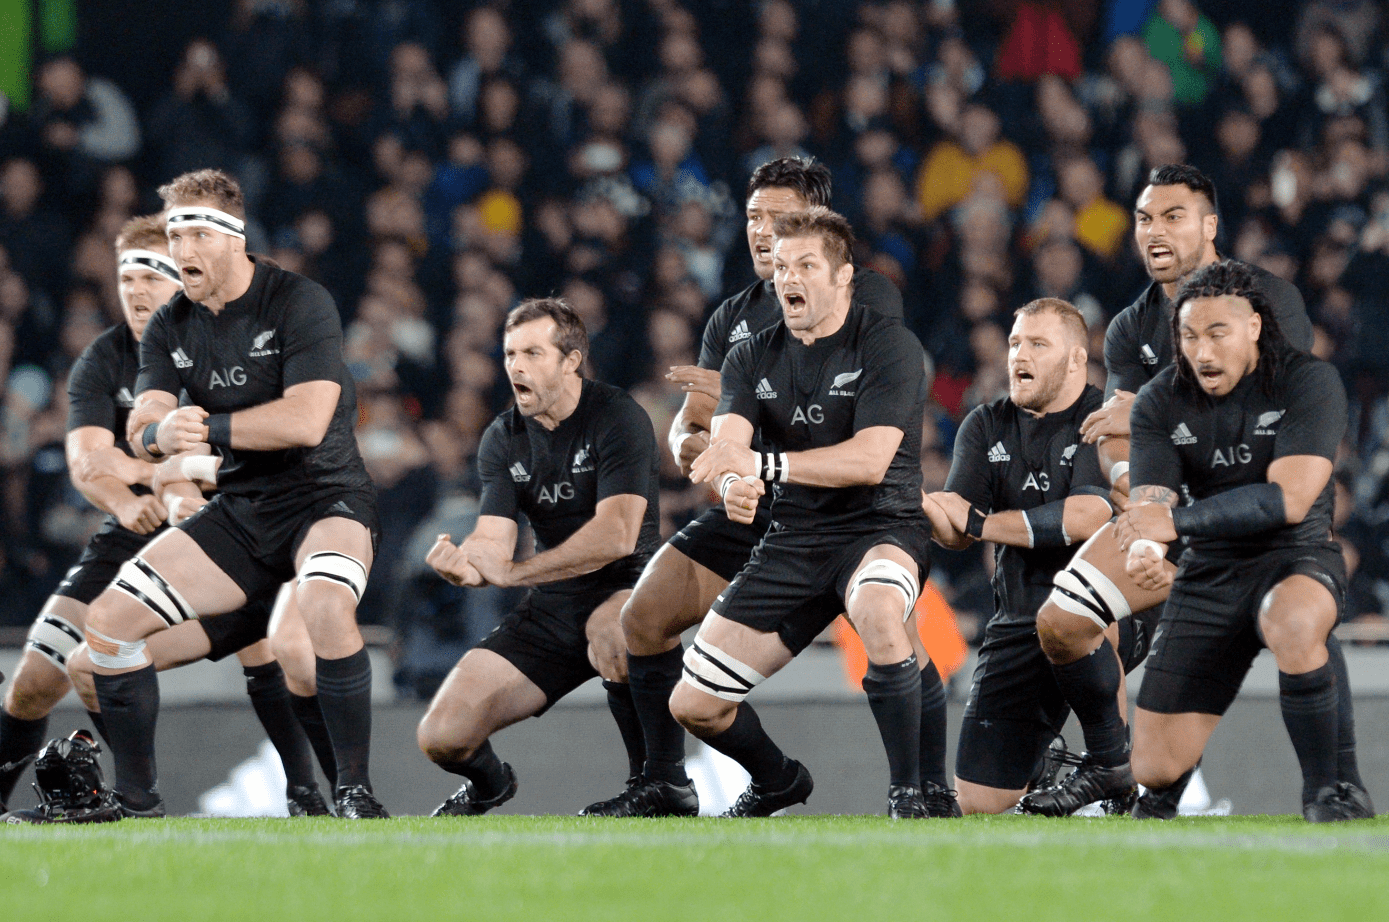 Event of the Month: HAKA